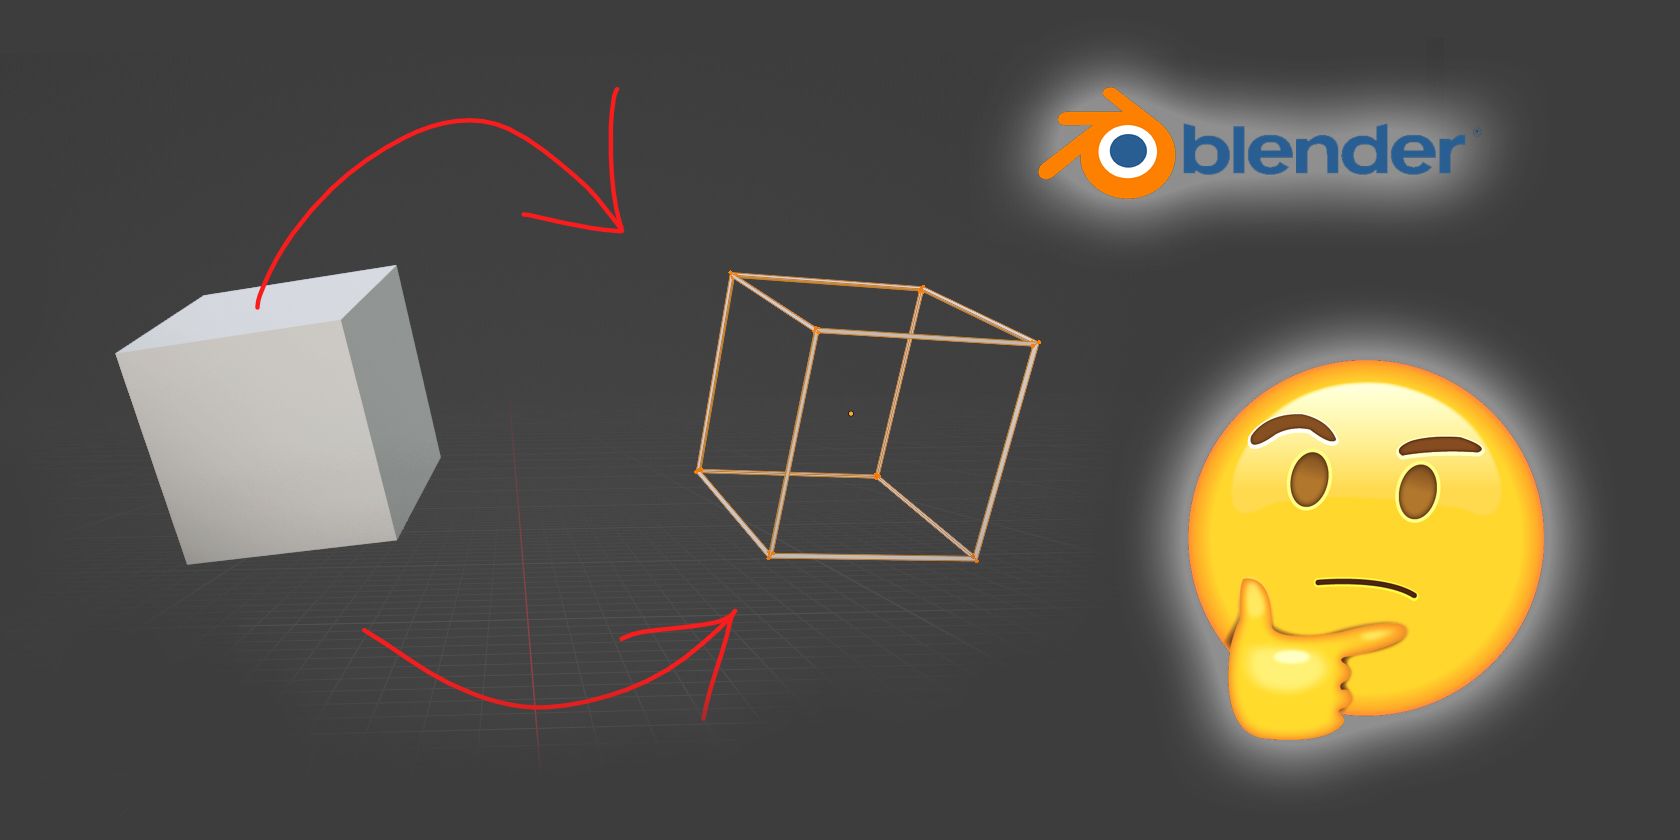 Creating a wireframe mesh in Blender.